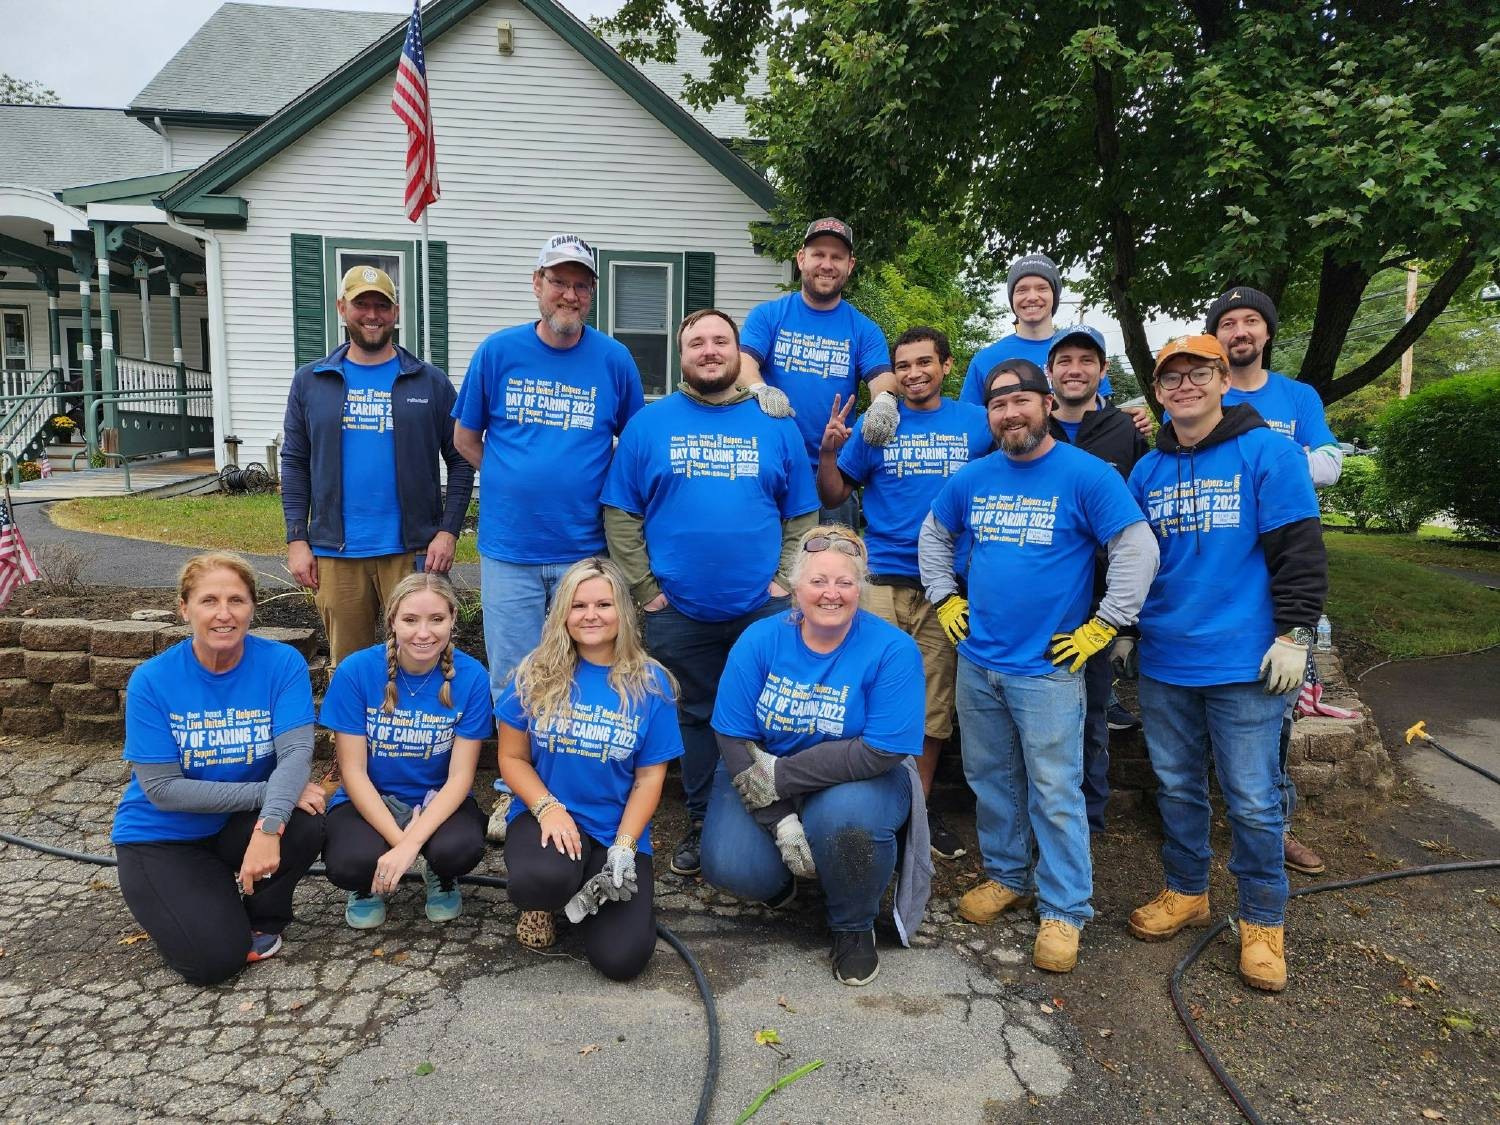 Day of Caring with United Way sponsors and volunteering at My Friend's Place in Dover, NH.